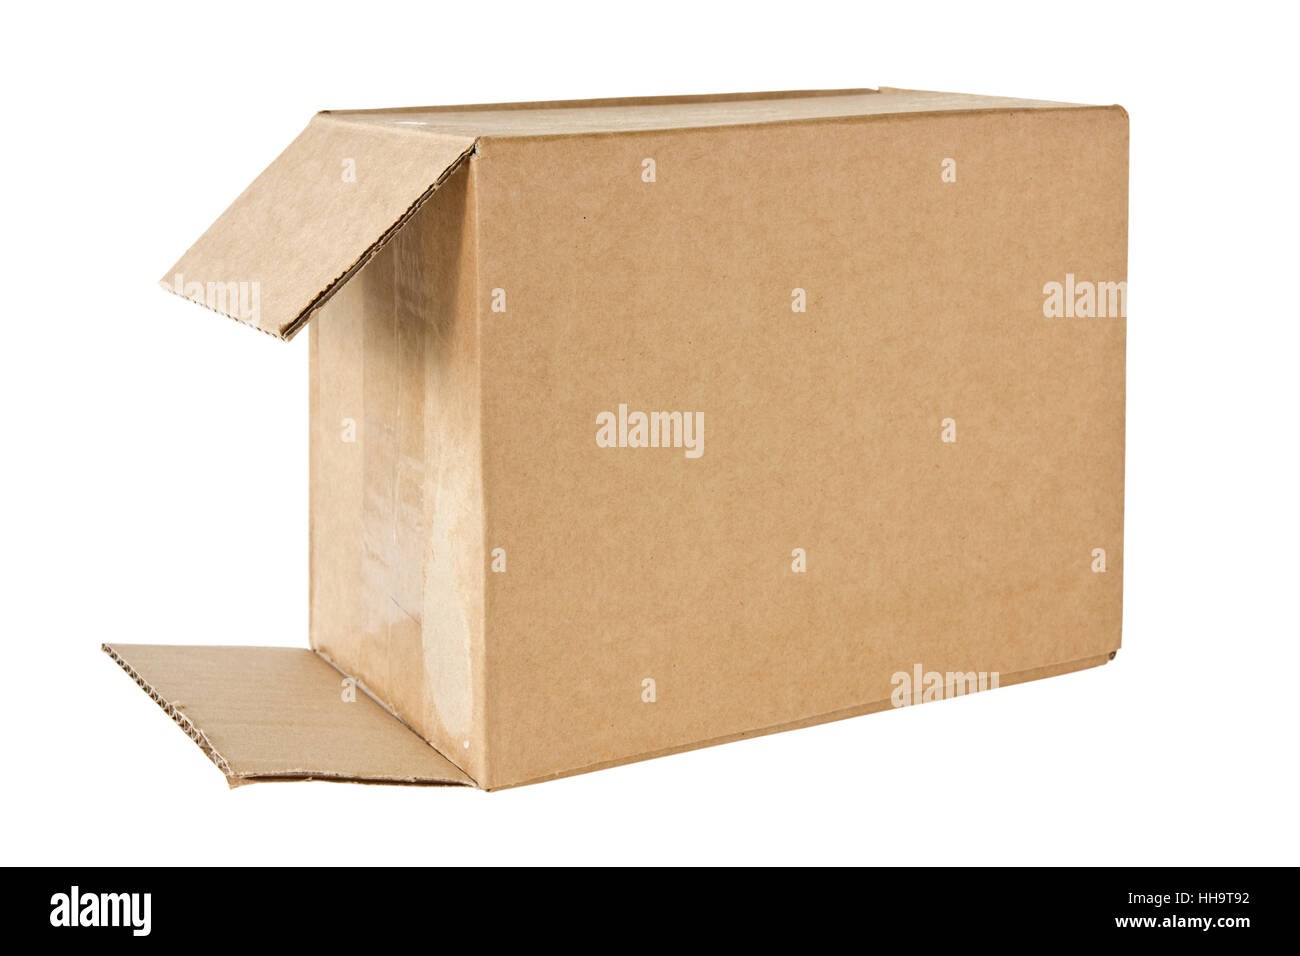 brown, brownish, brunette, package, parcel, box, boxes, shipping, delivery, Stock Photo